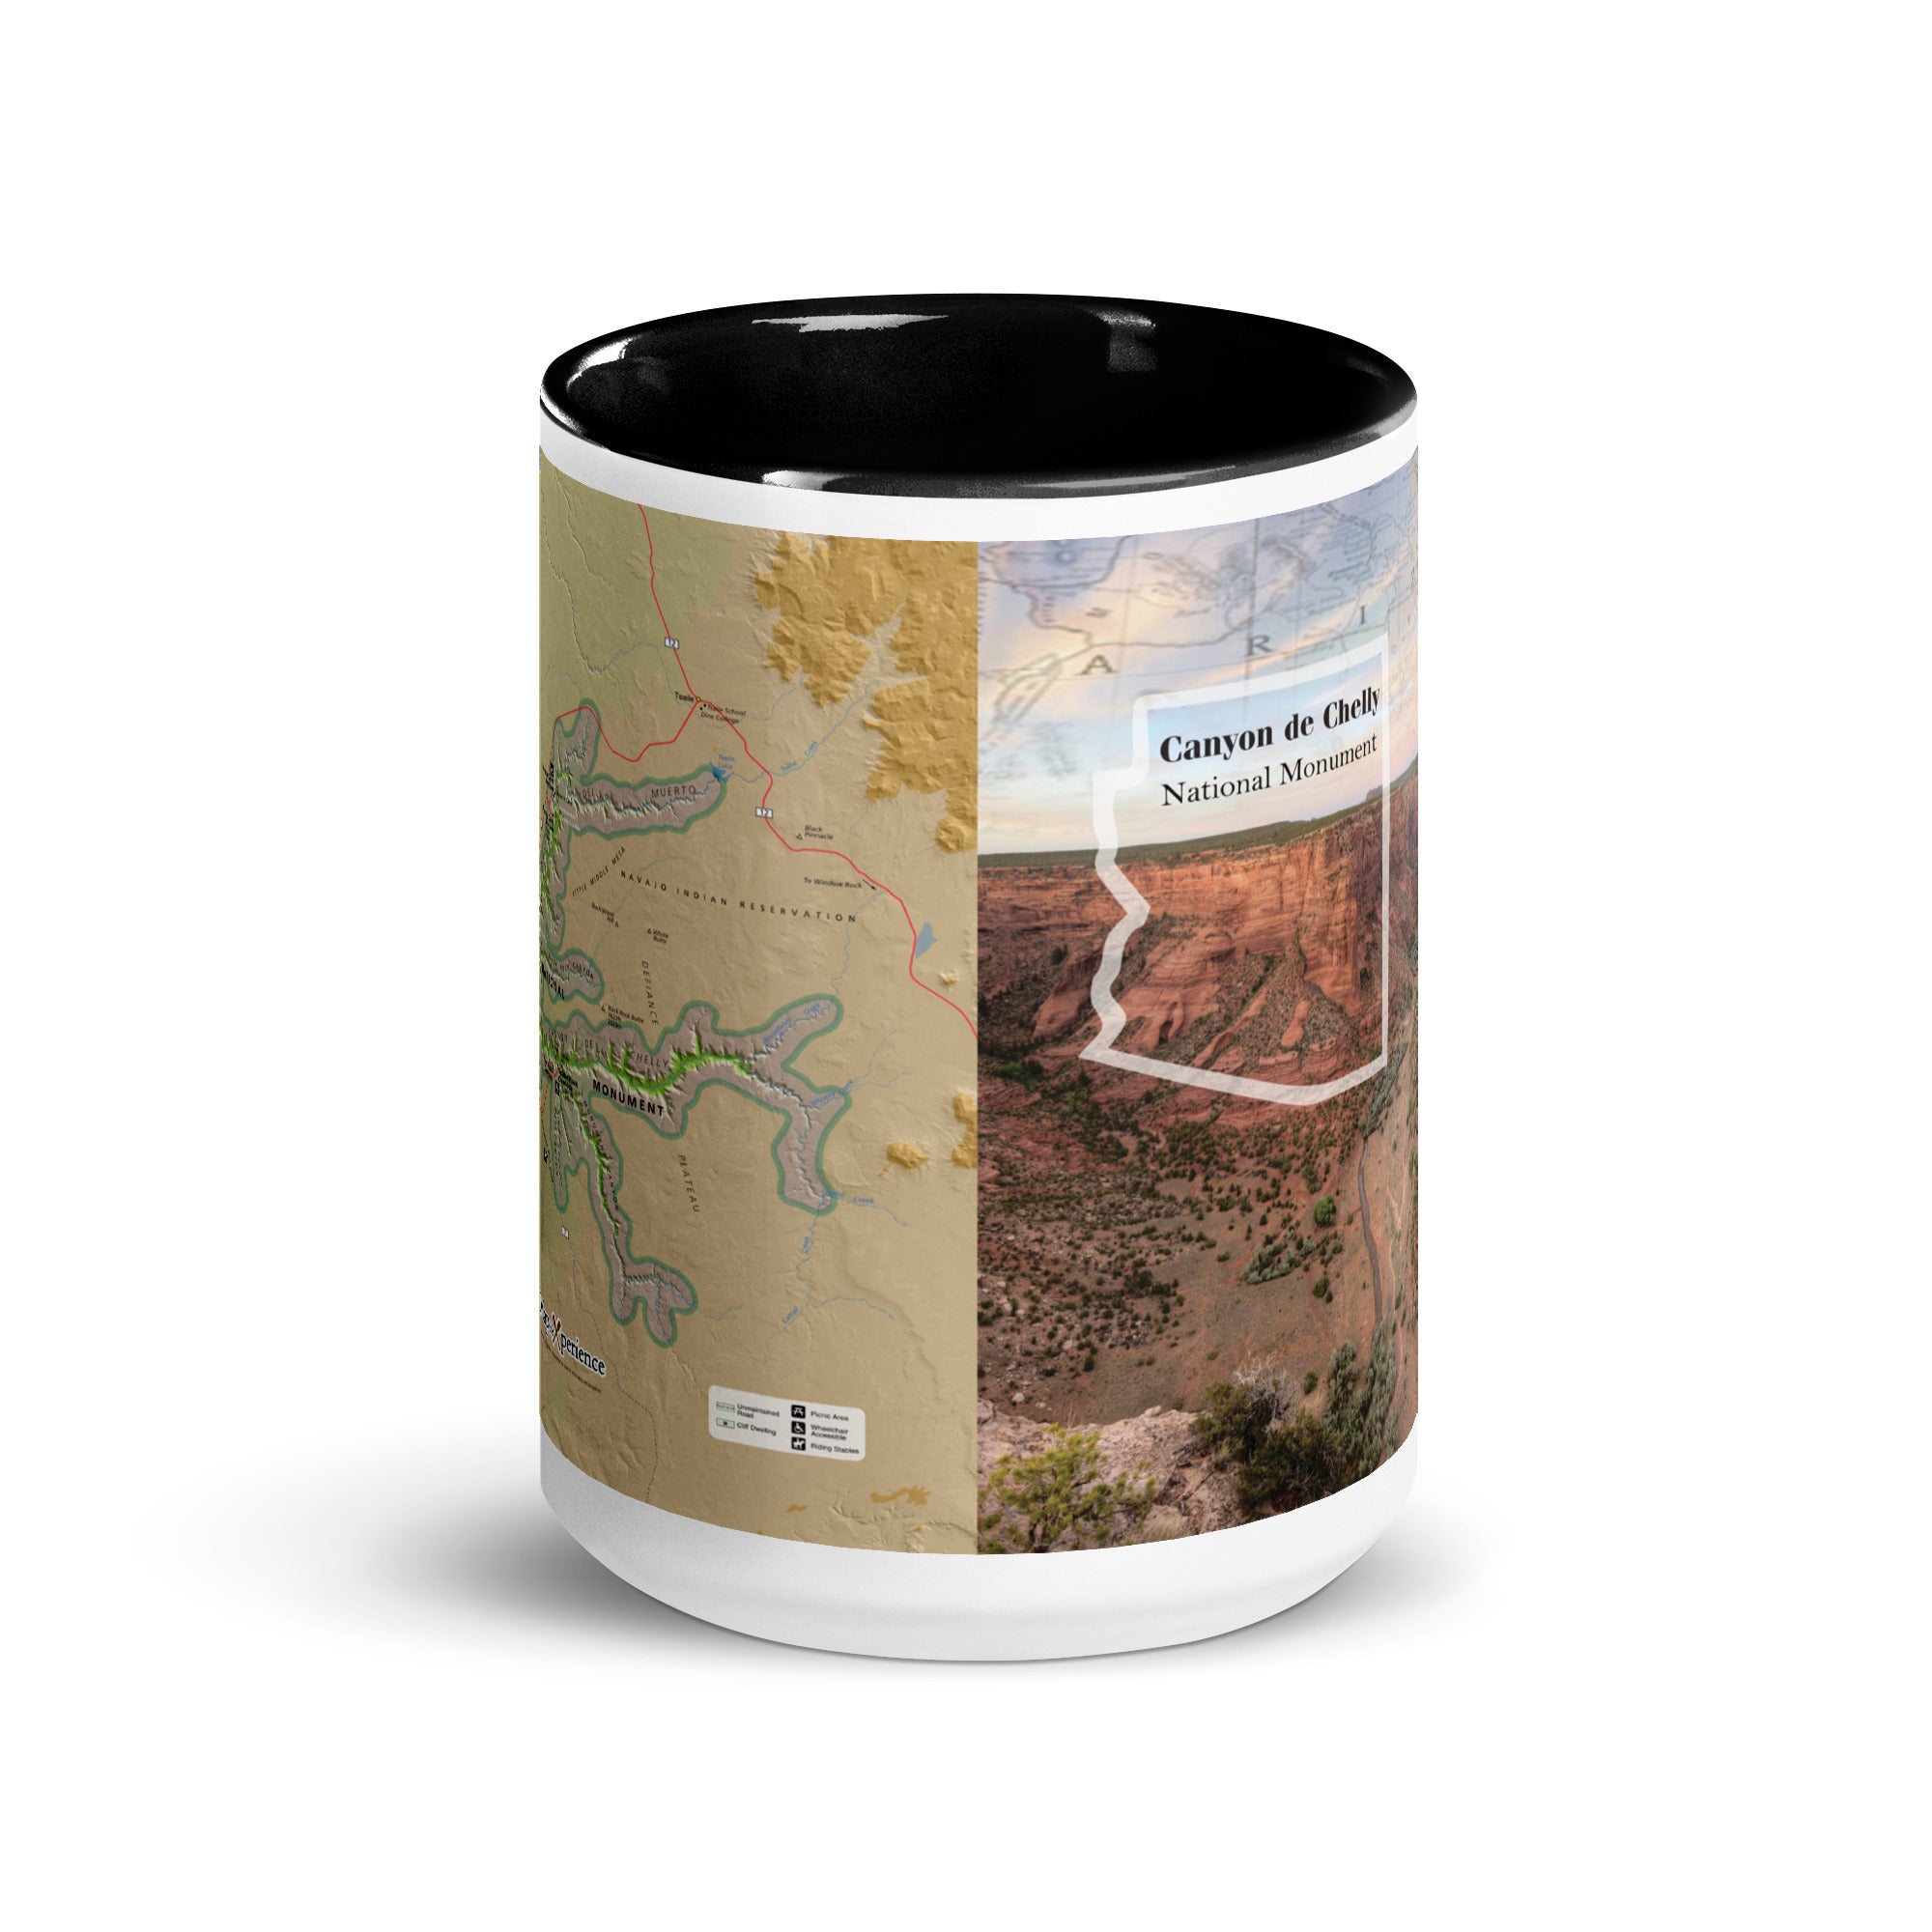 Canyon De Chelly National Monument Mug with Black Inside